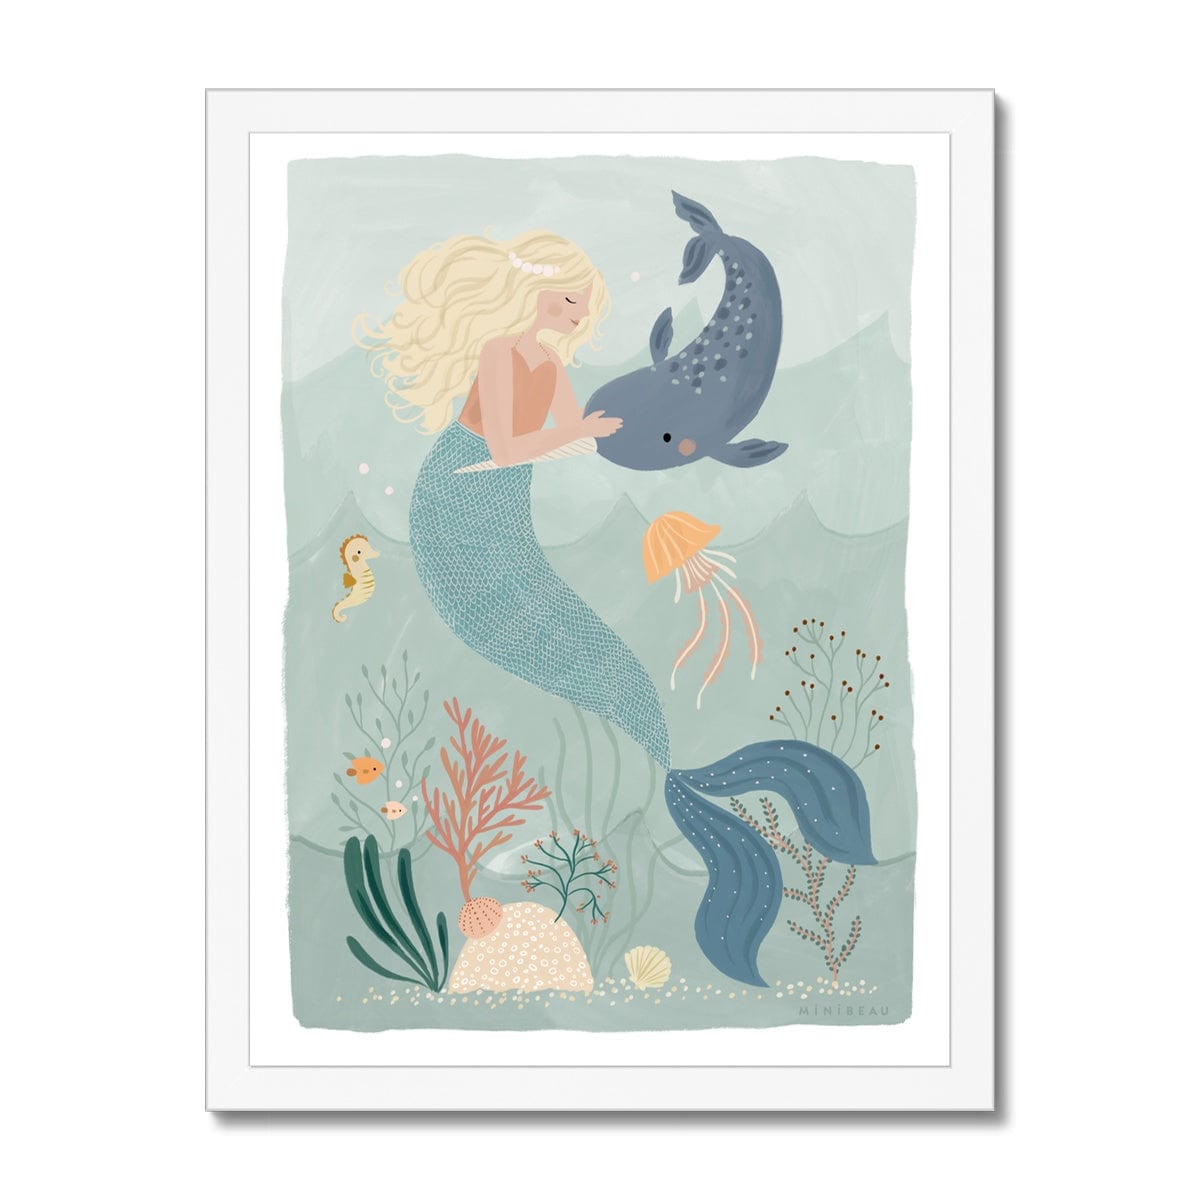 Picture of a hand-painted picture depicting Coral the Mermaid petting a Narwhal at the bottom of the sea. Coral is blonde and wearing an orange top and her tail is a deep teal. She is wearing a pearl headband. In the background are 2 small angel fish, a sea horse and a jellyfish amongst sea foliage with a white border in a white frame